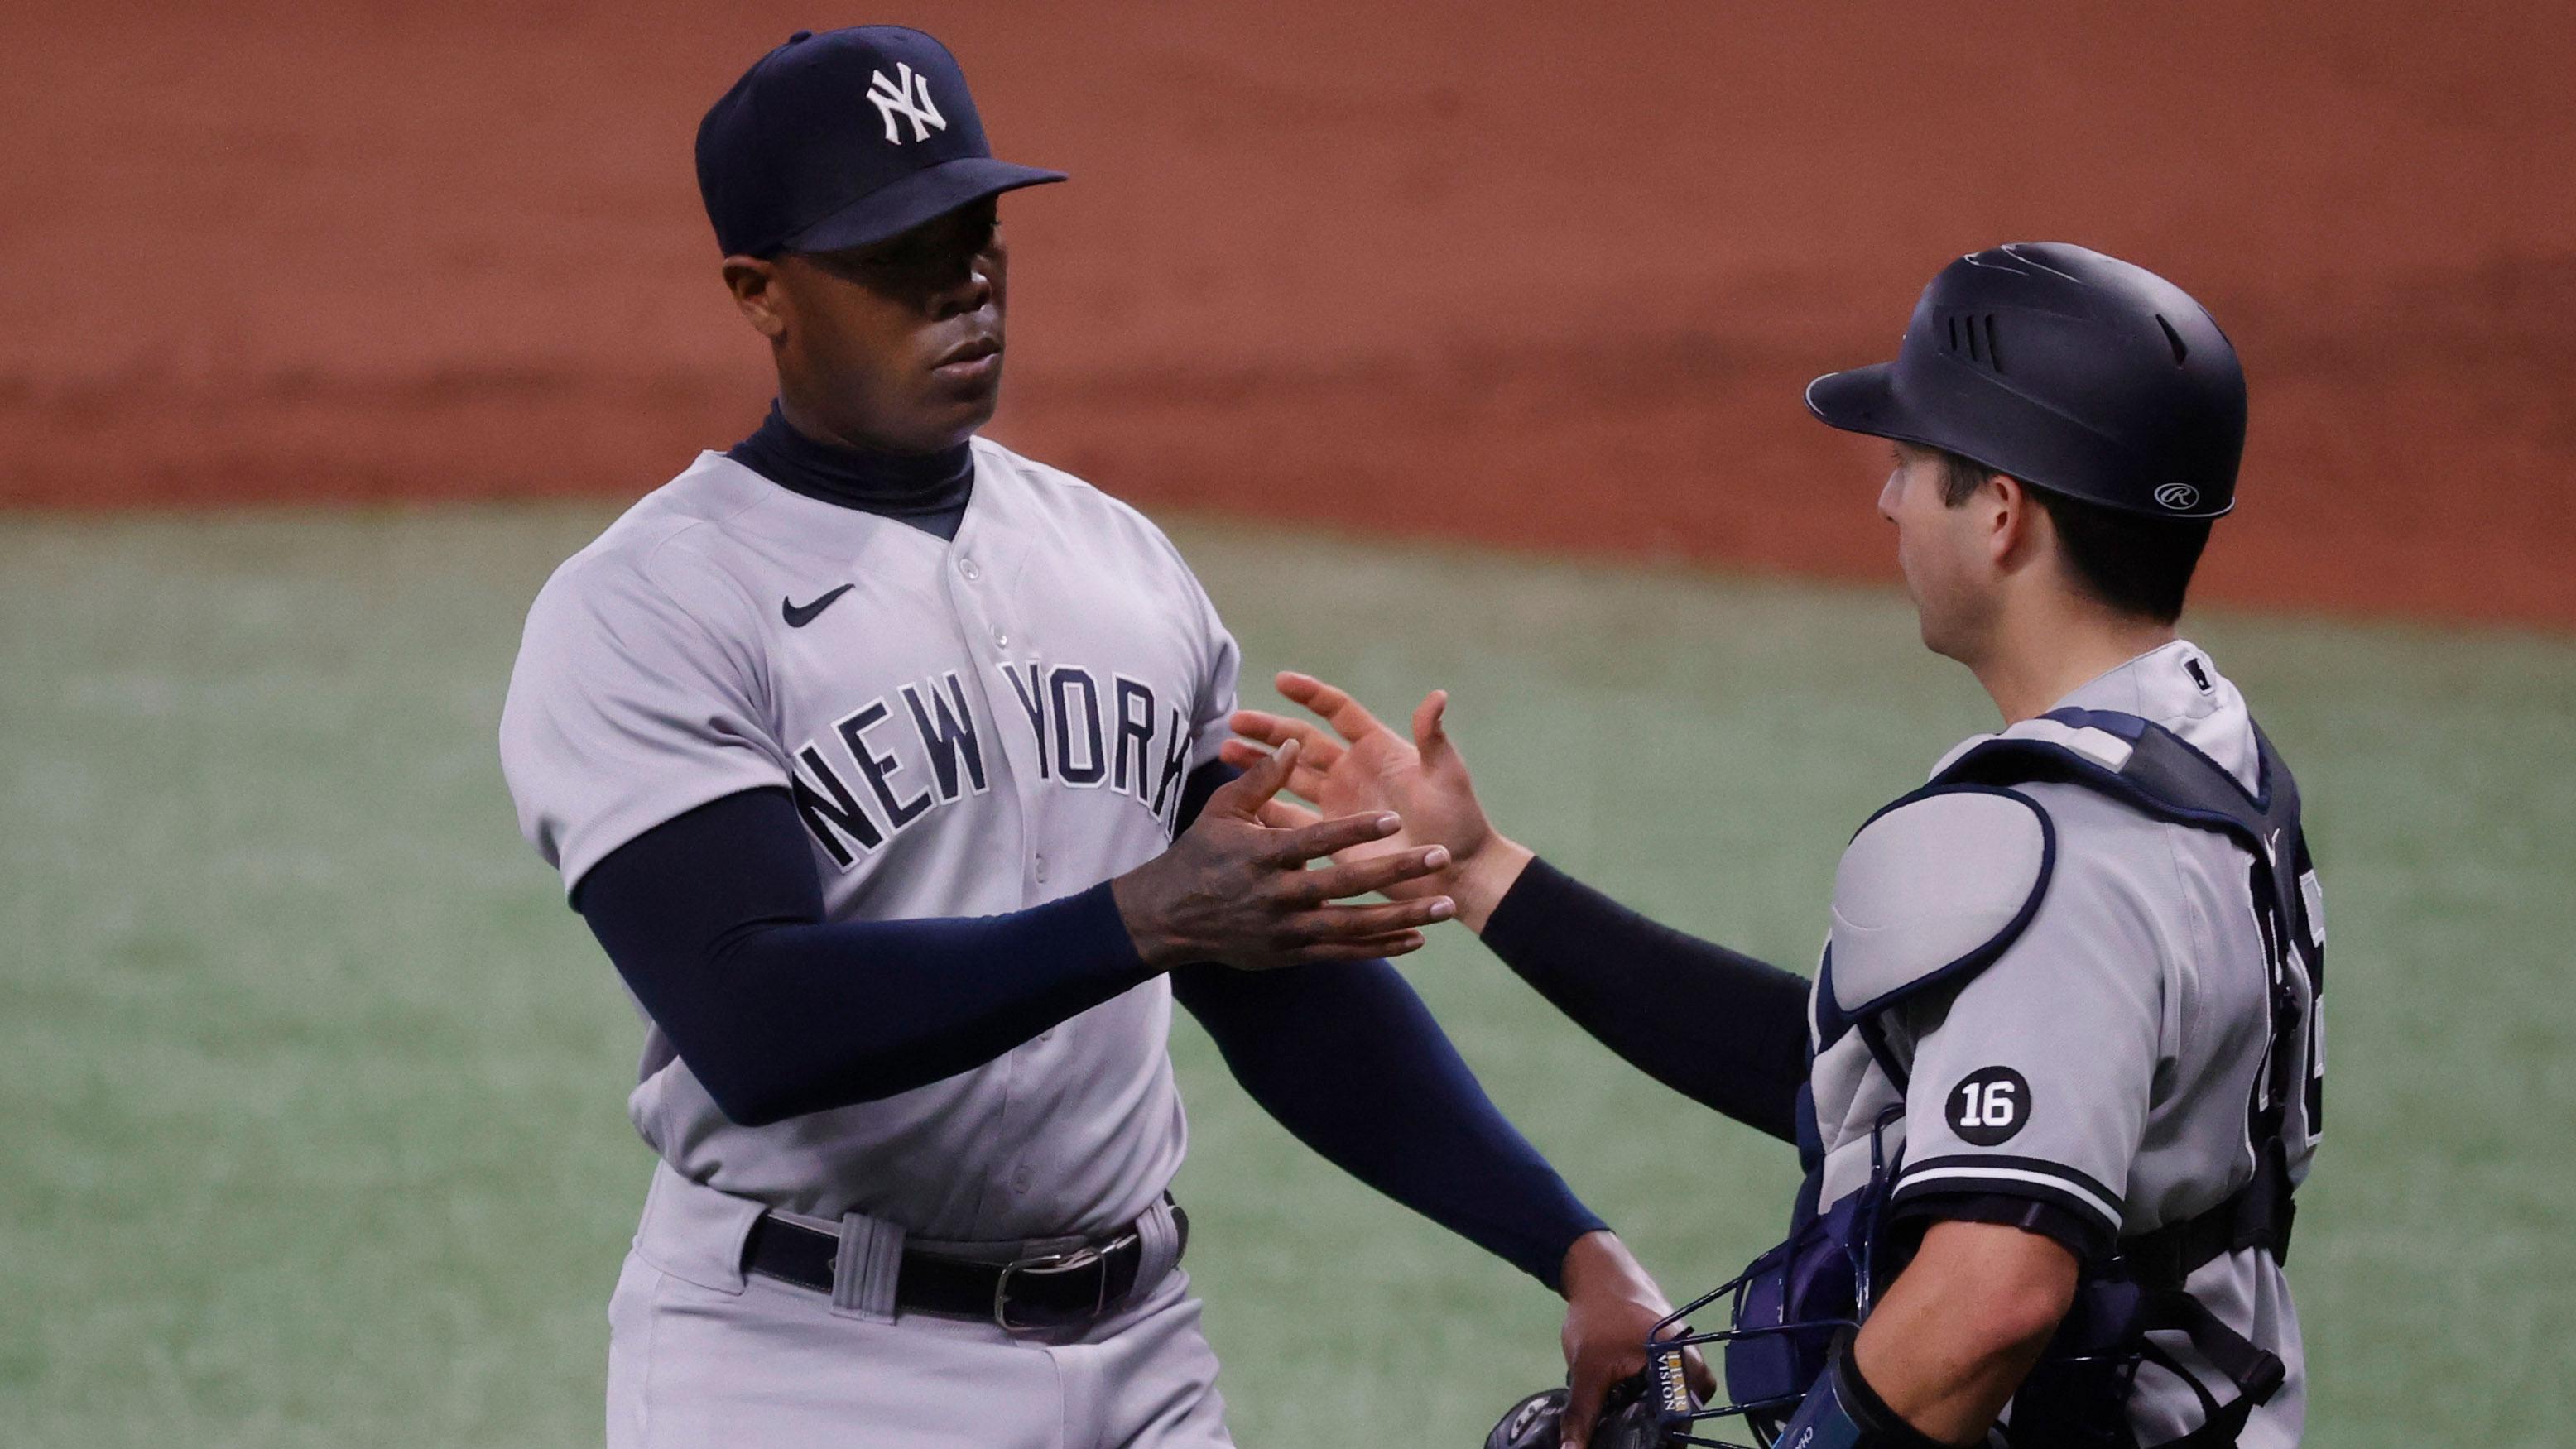 May 12, 2021; St. Petersburg, Florida, USA; New York Yankees relief pitcher Aroldis Chapman (54) and New York Yankees catcher Kyle Higashioka (66) high five as they beat the Tampa Bay Rays at Tropicana Field / Kim Klement-USA TODAY Sports